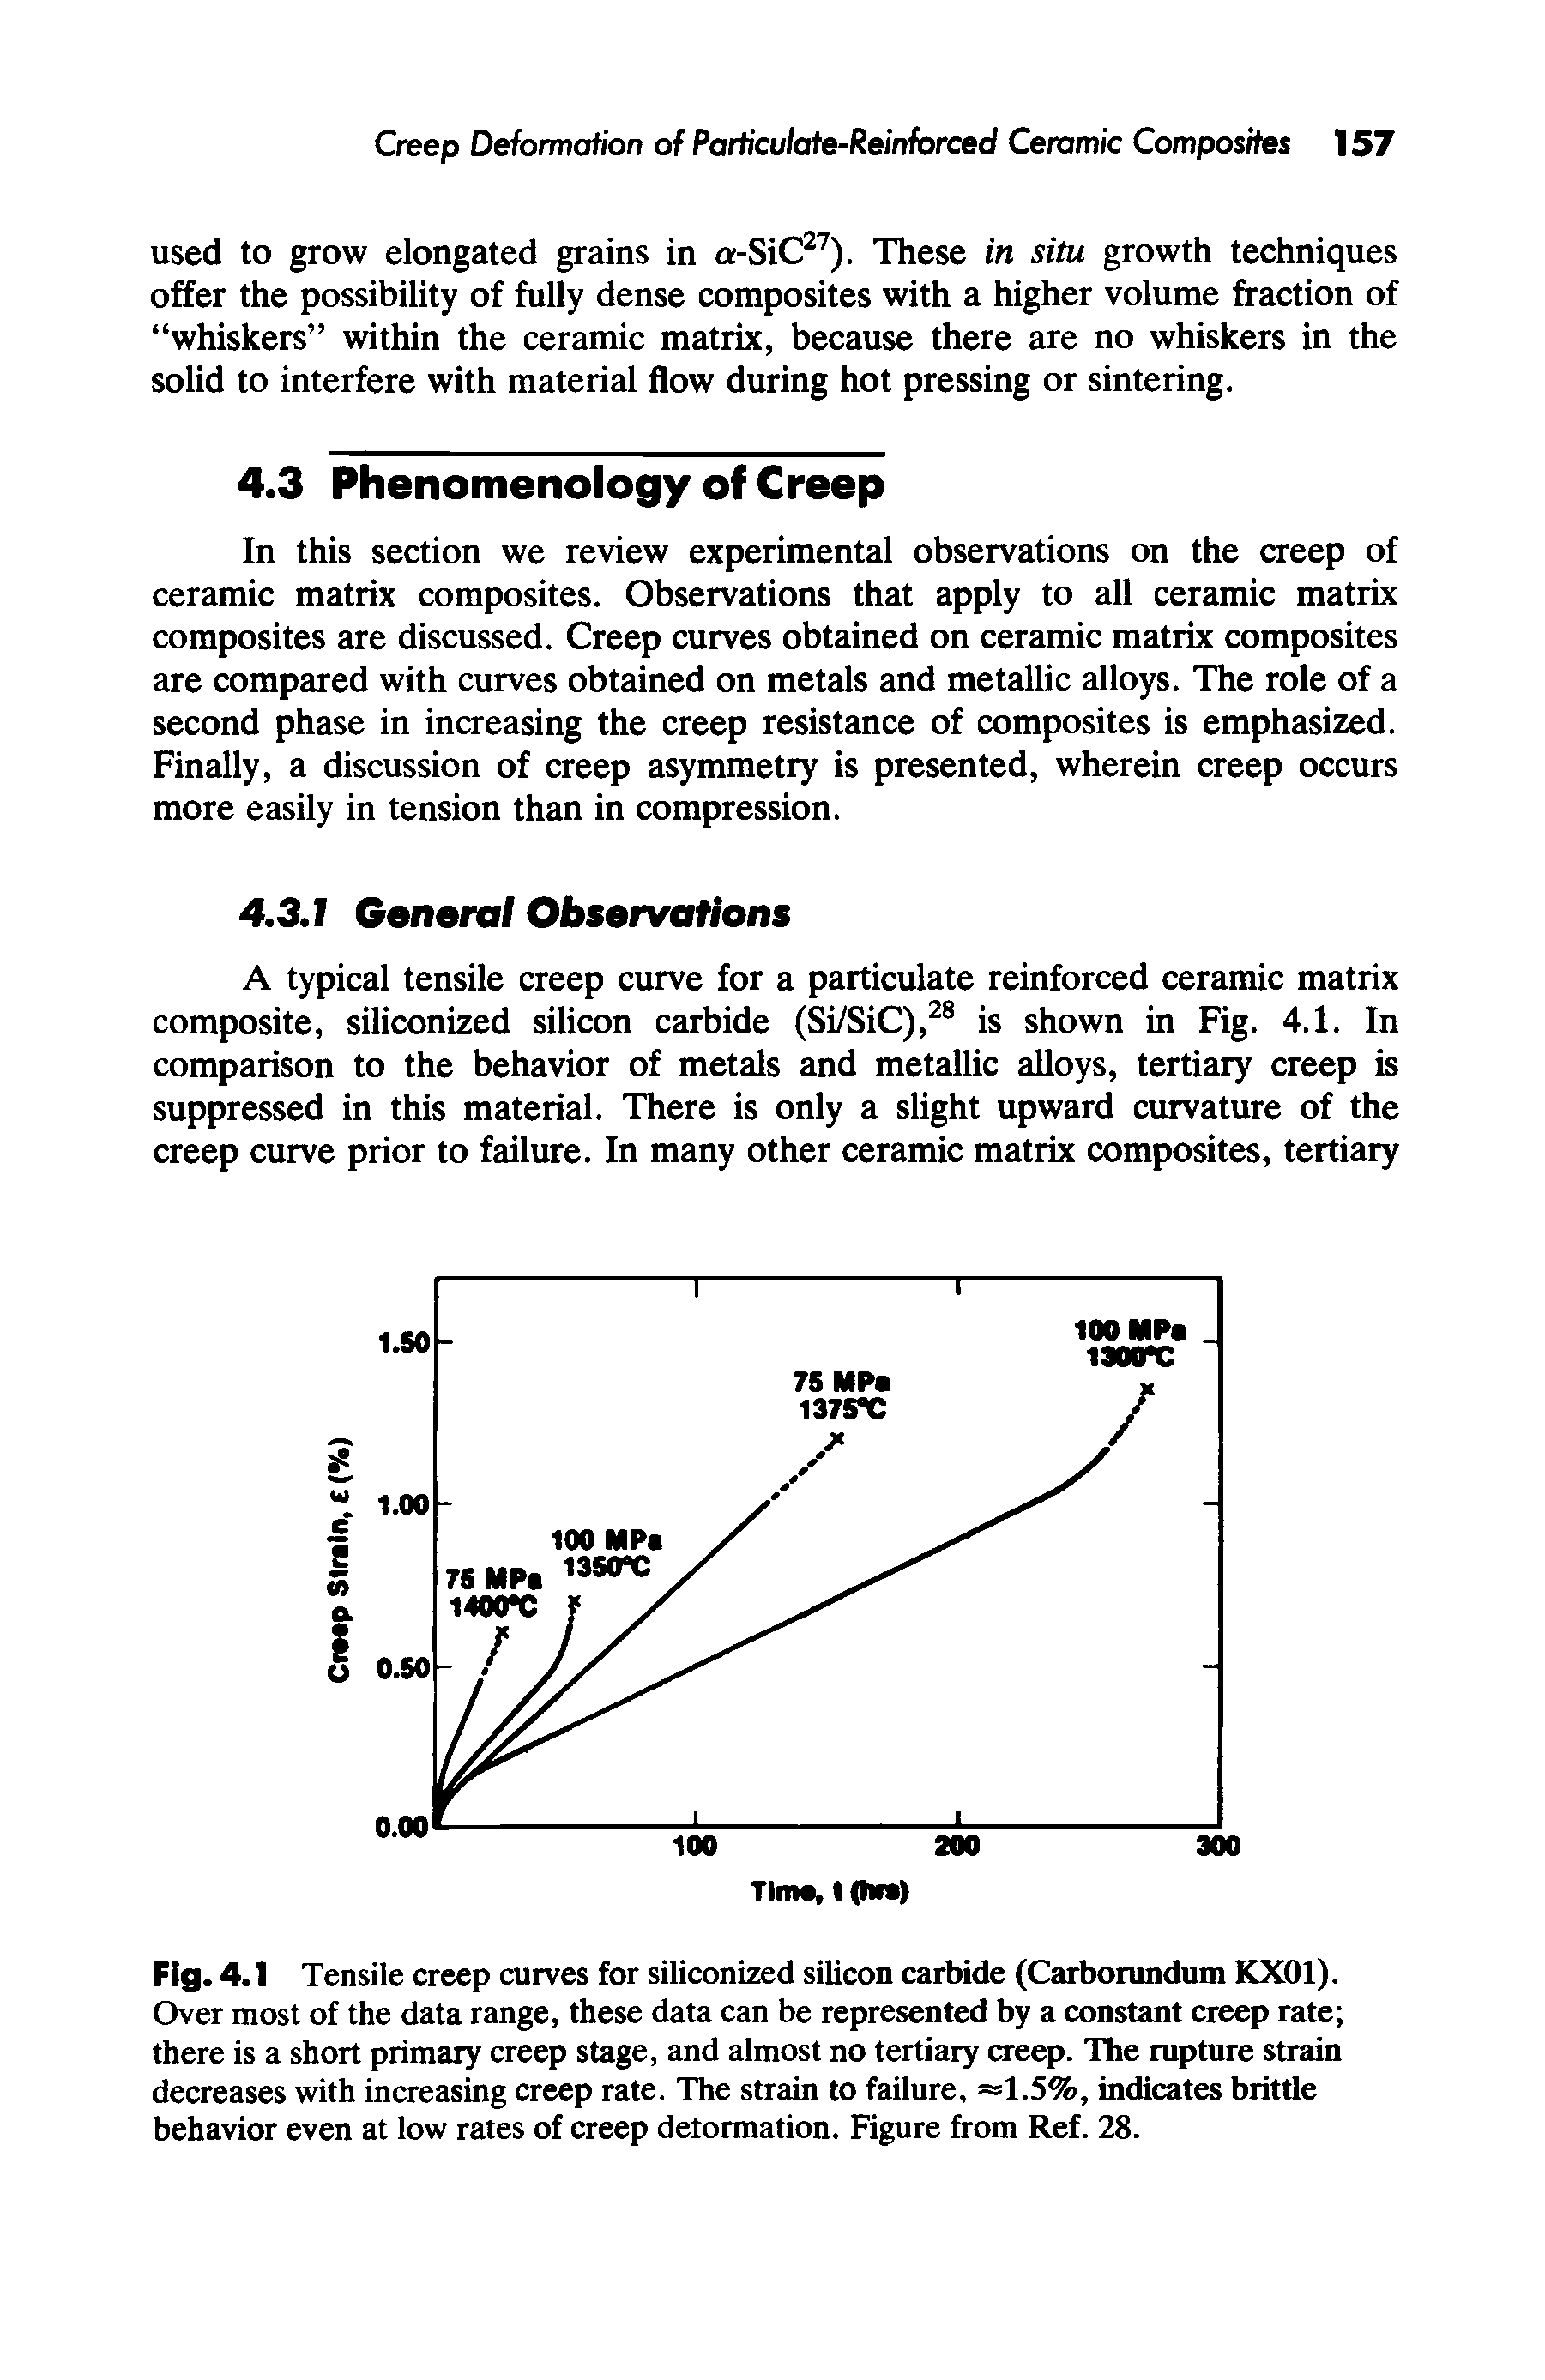 Fig. 4.1 Tensile creep curves for siliconized silicon carbide (Carborundum KX01). Over most of the data range, these data can be represented by a constant creep rate there is a short primary creep stage, and almost no tertiary creep. The rupture strain decreases with increasing creep rate. The strain to failure, =1.5%, indicates brittle behavior even at low rates of creep detormation. Figure from Ref. 28.